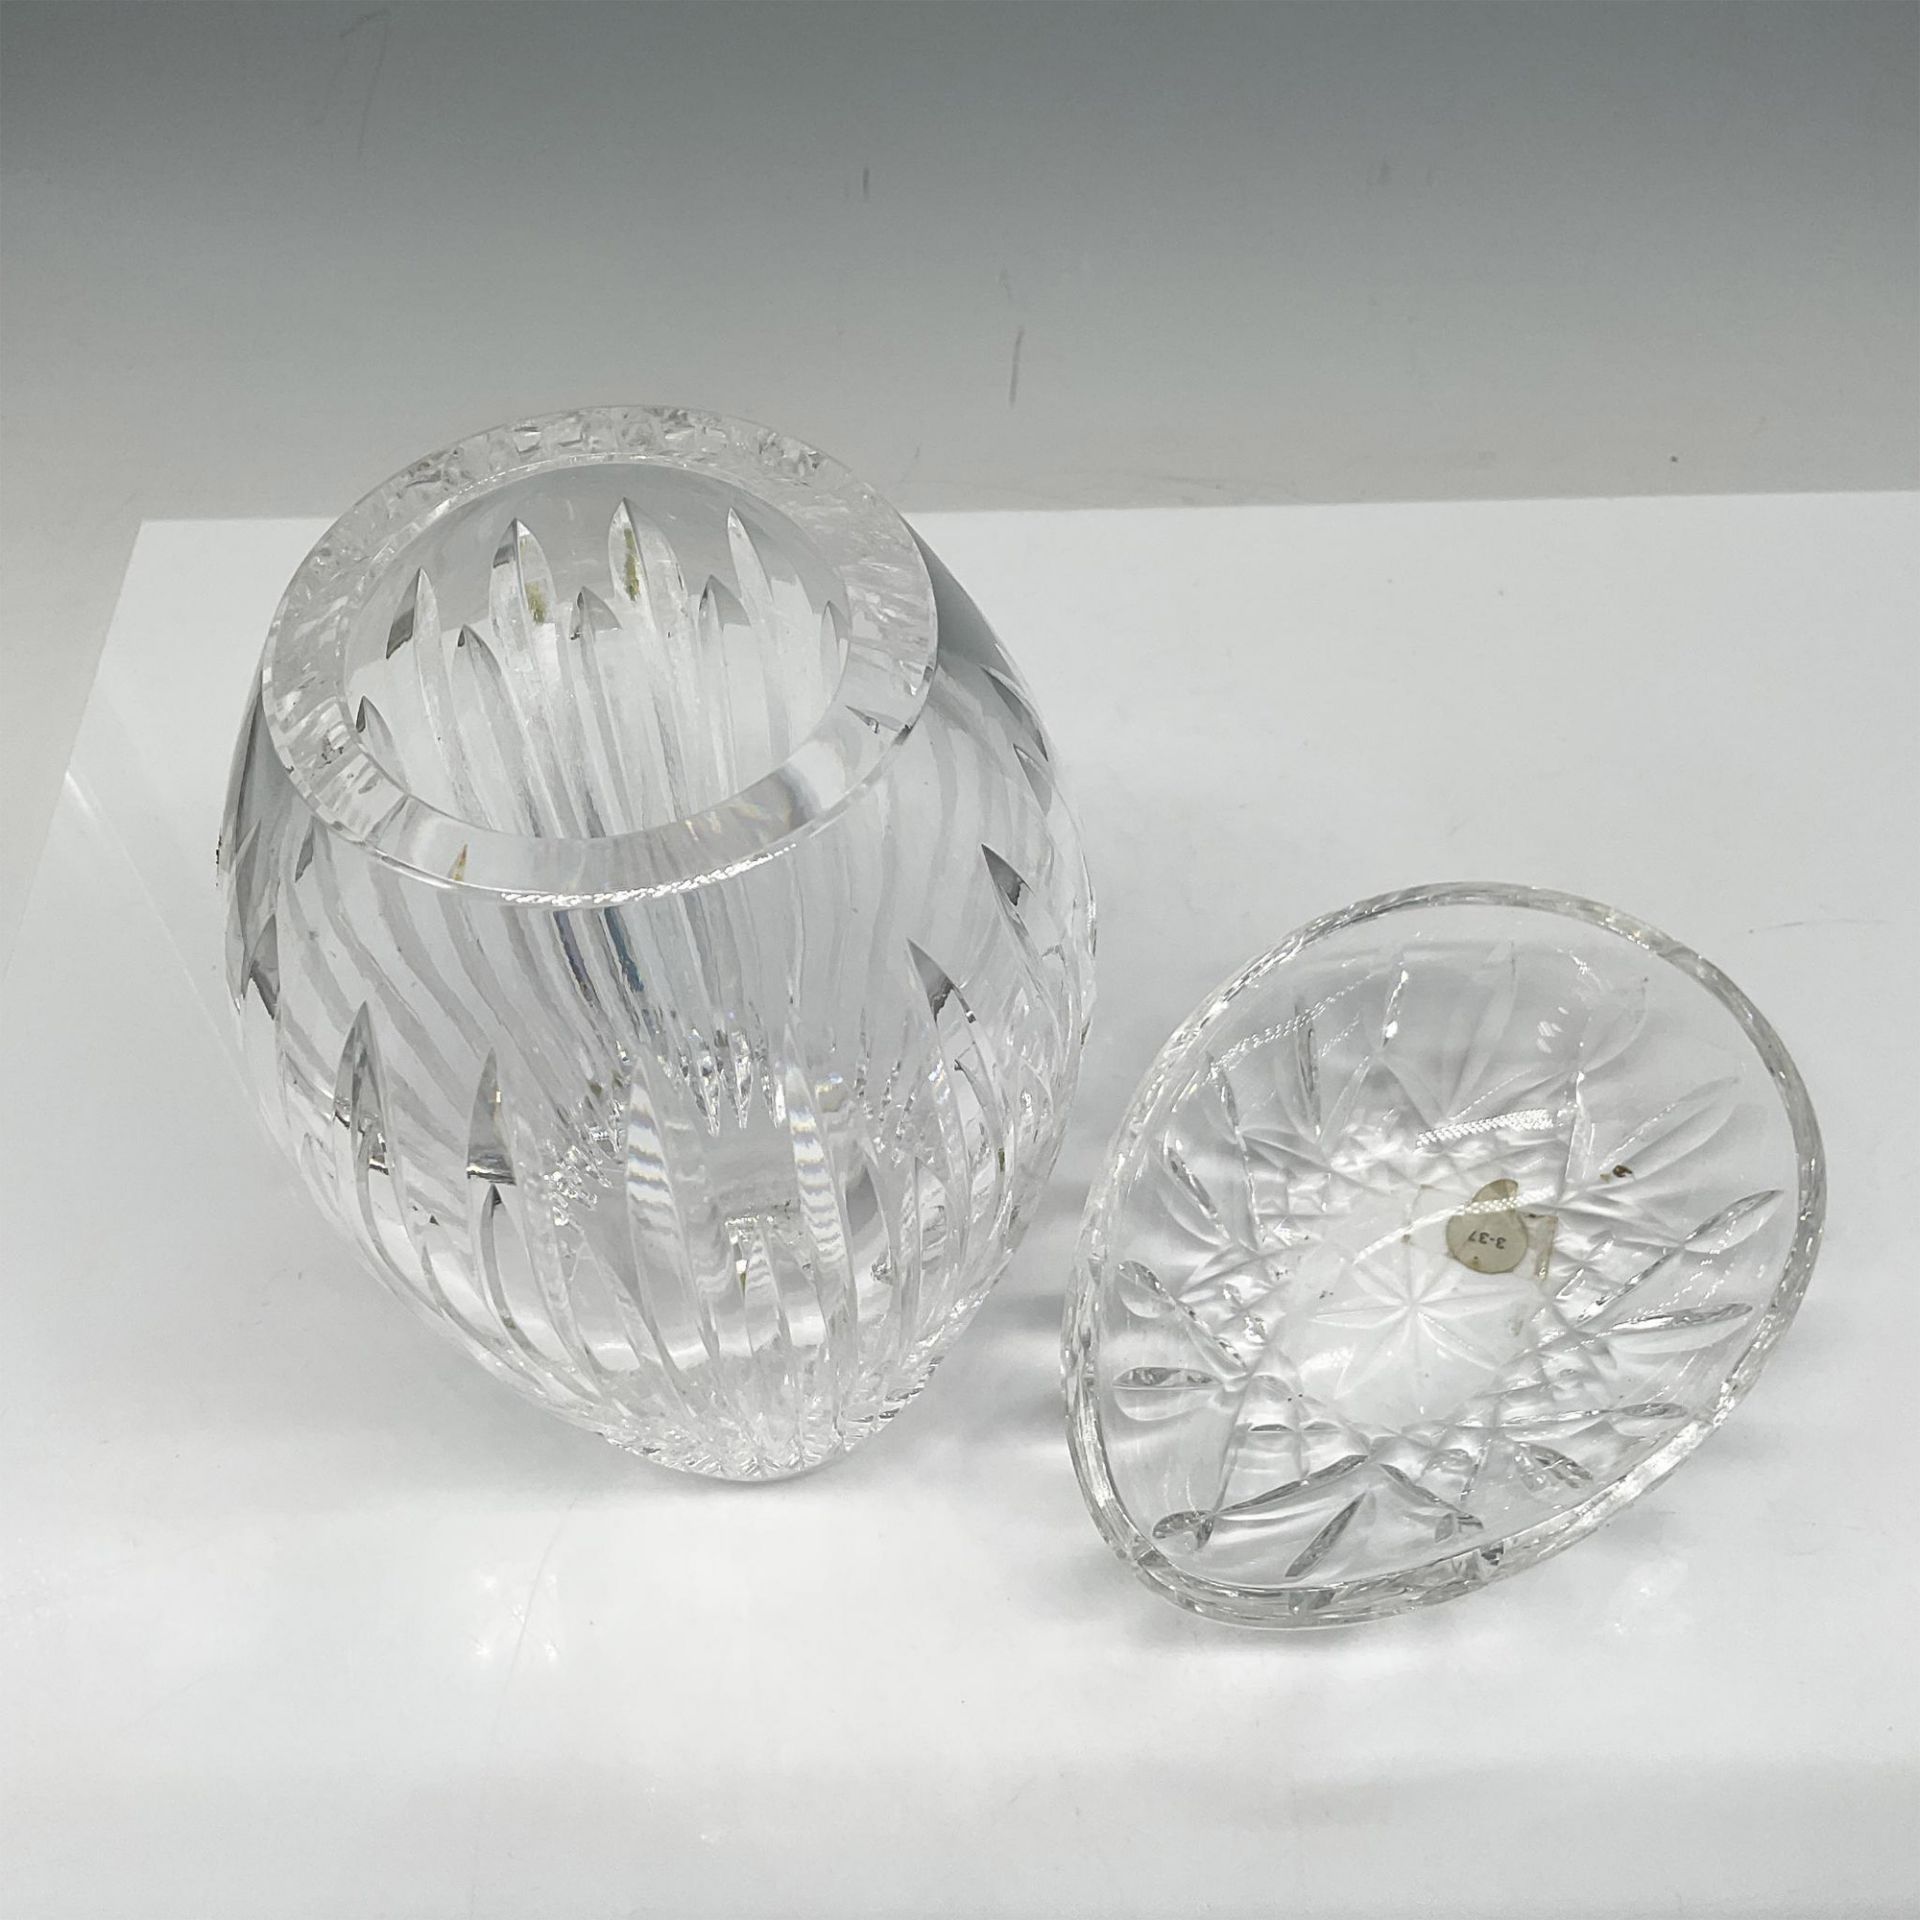 2pc Waterford Crystal Vase and Nut Dish - Image 2 of 3